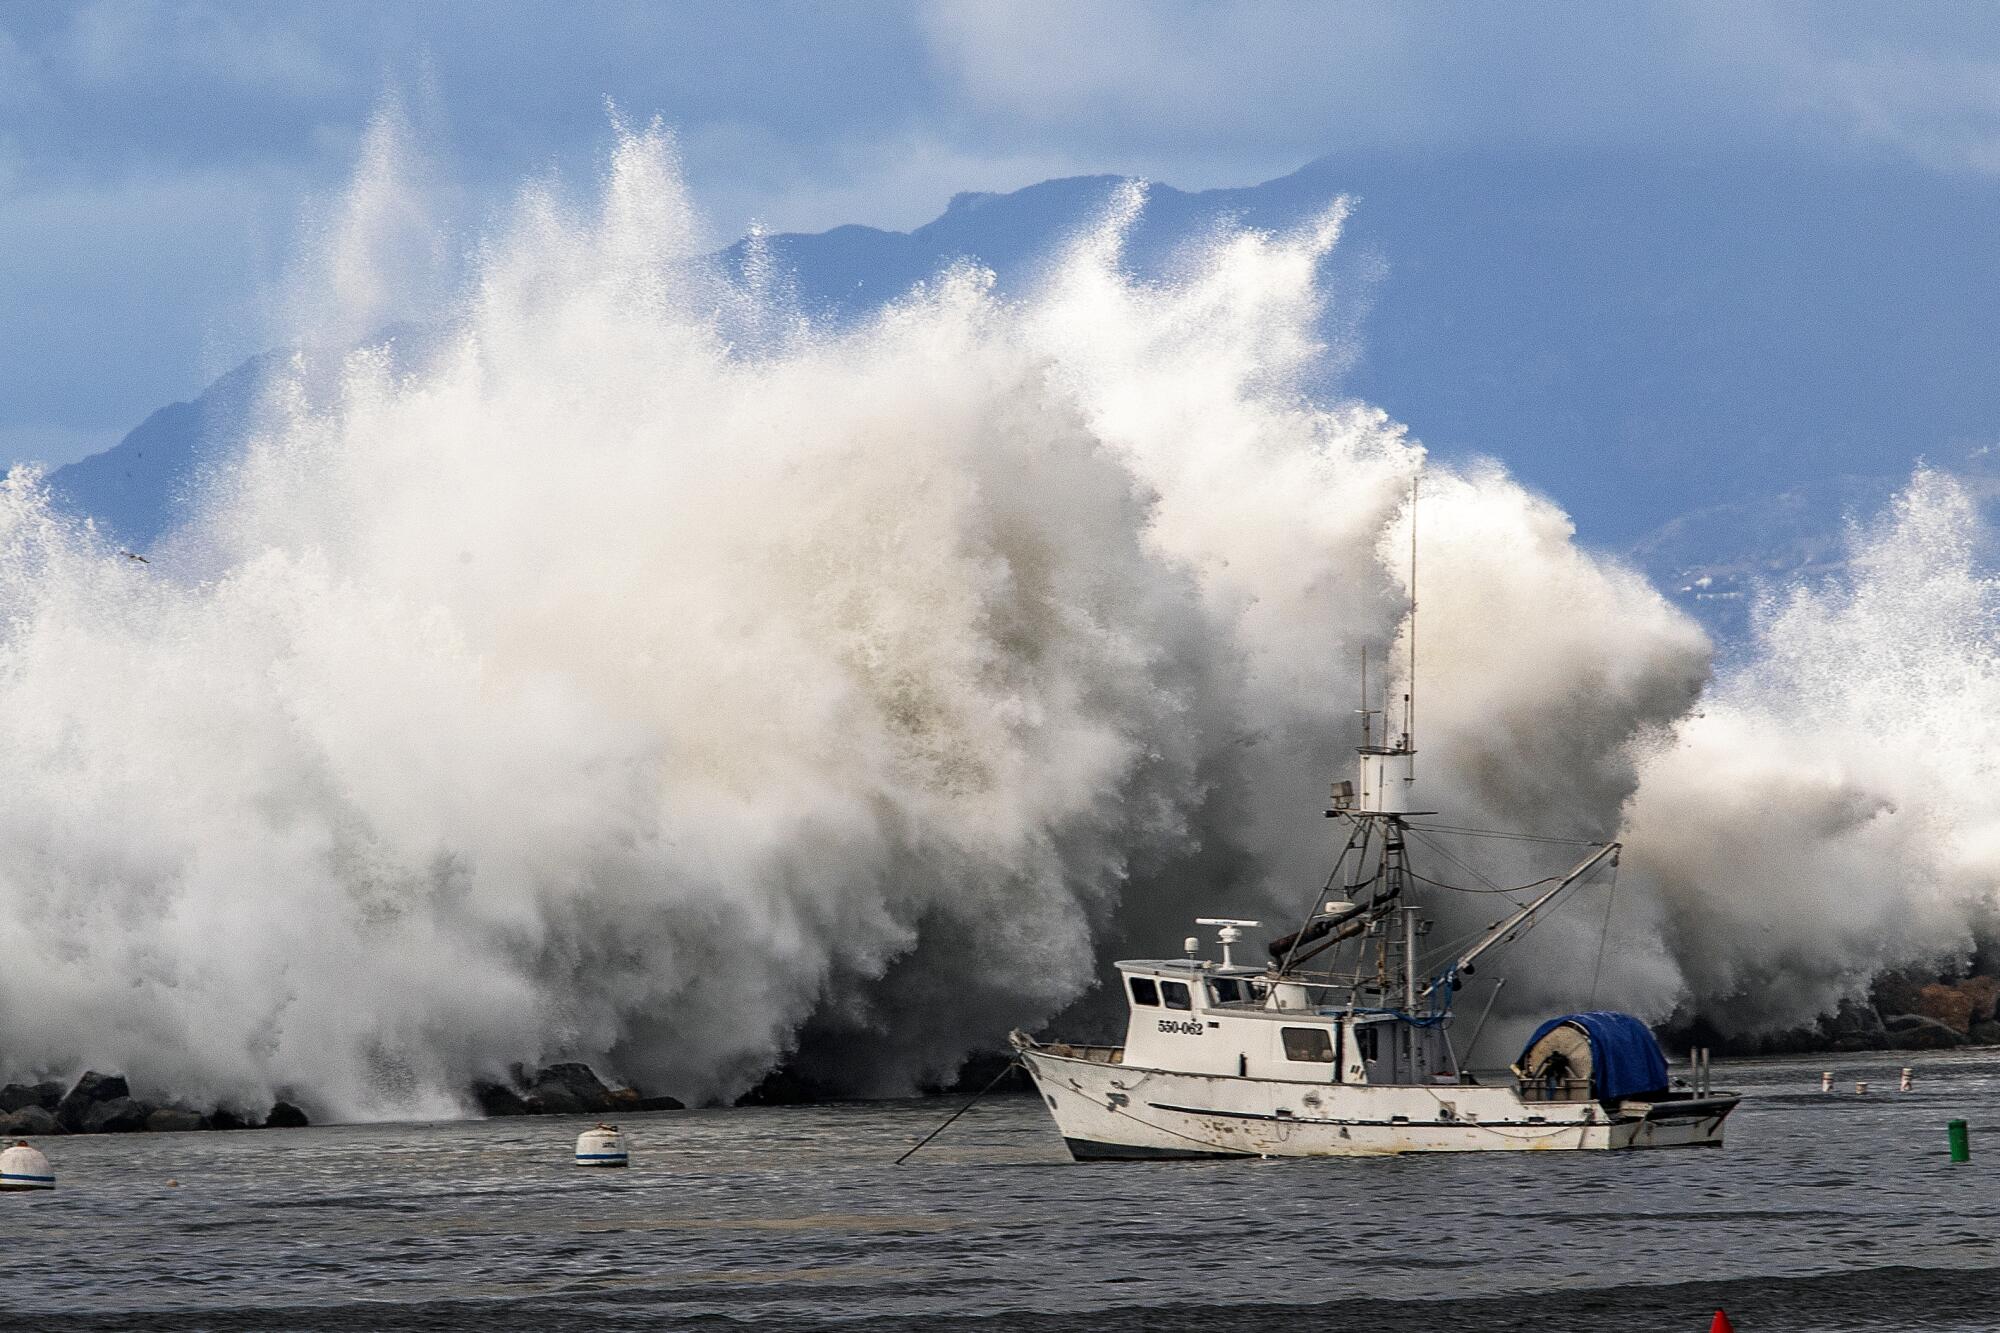 A giant wave crashes over a jetty as a fishing boat floats in the foreground.